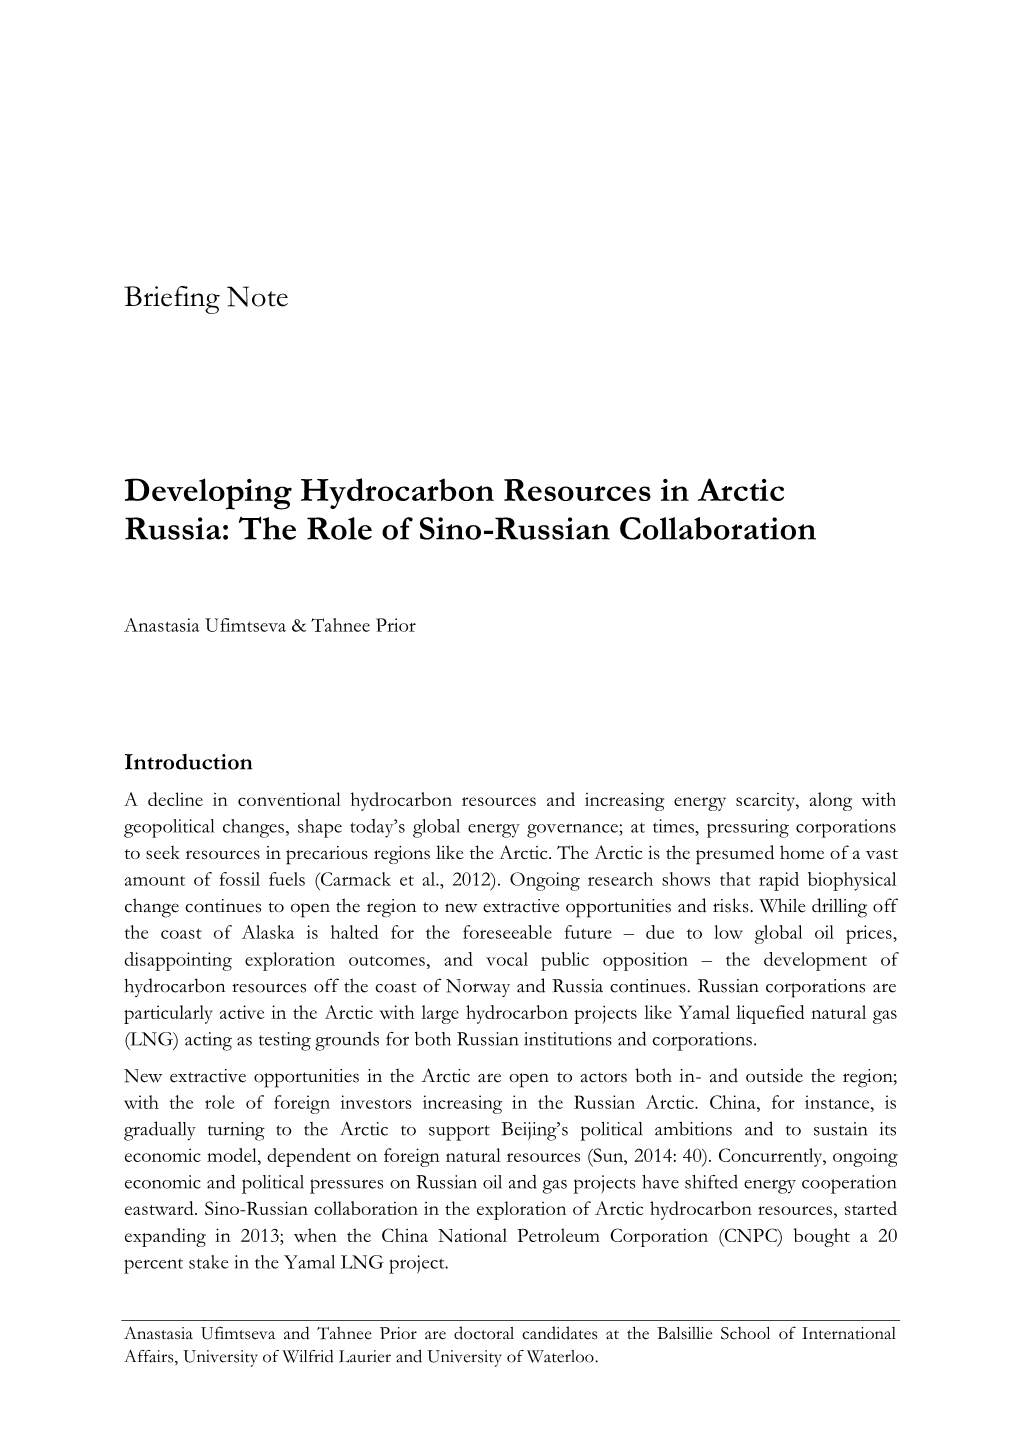 Developing Hydrocarbon Resources in Arctic Russia: the Role of Sino-Russian Collaboration